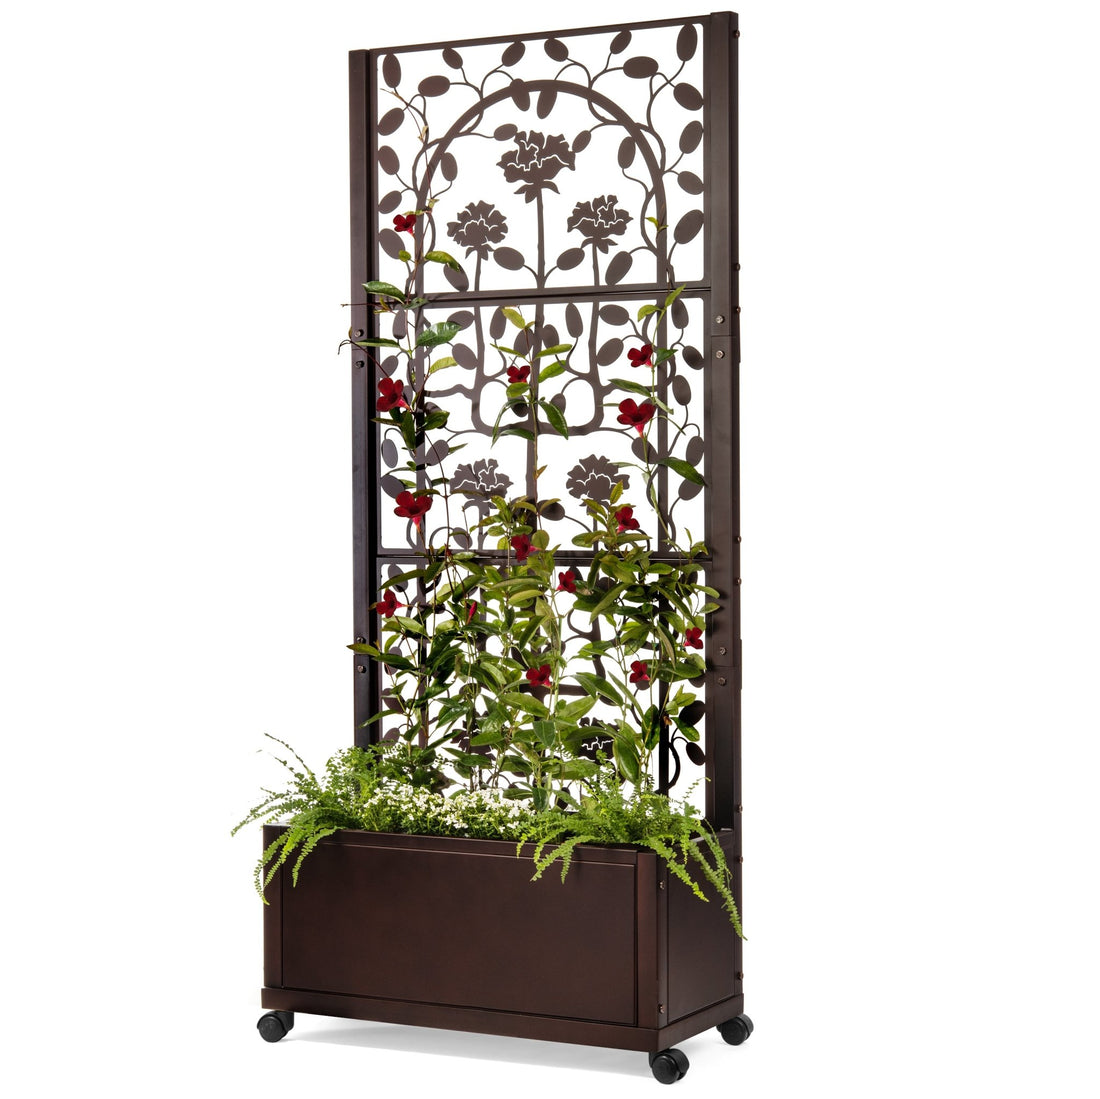 Transform Your Space with Trellis Planter Privacy Screens